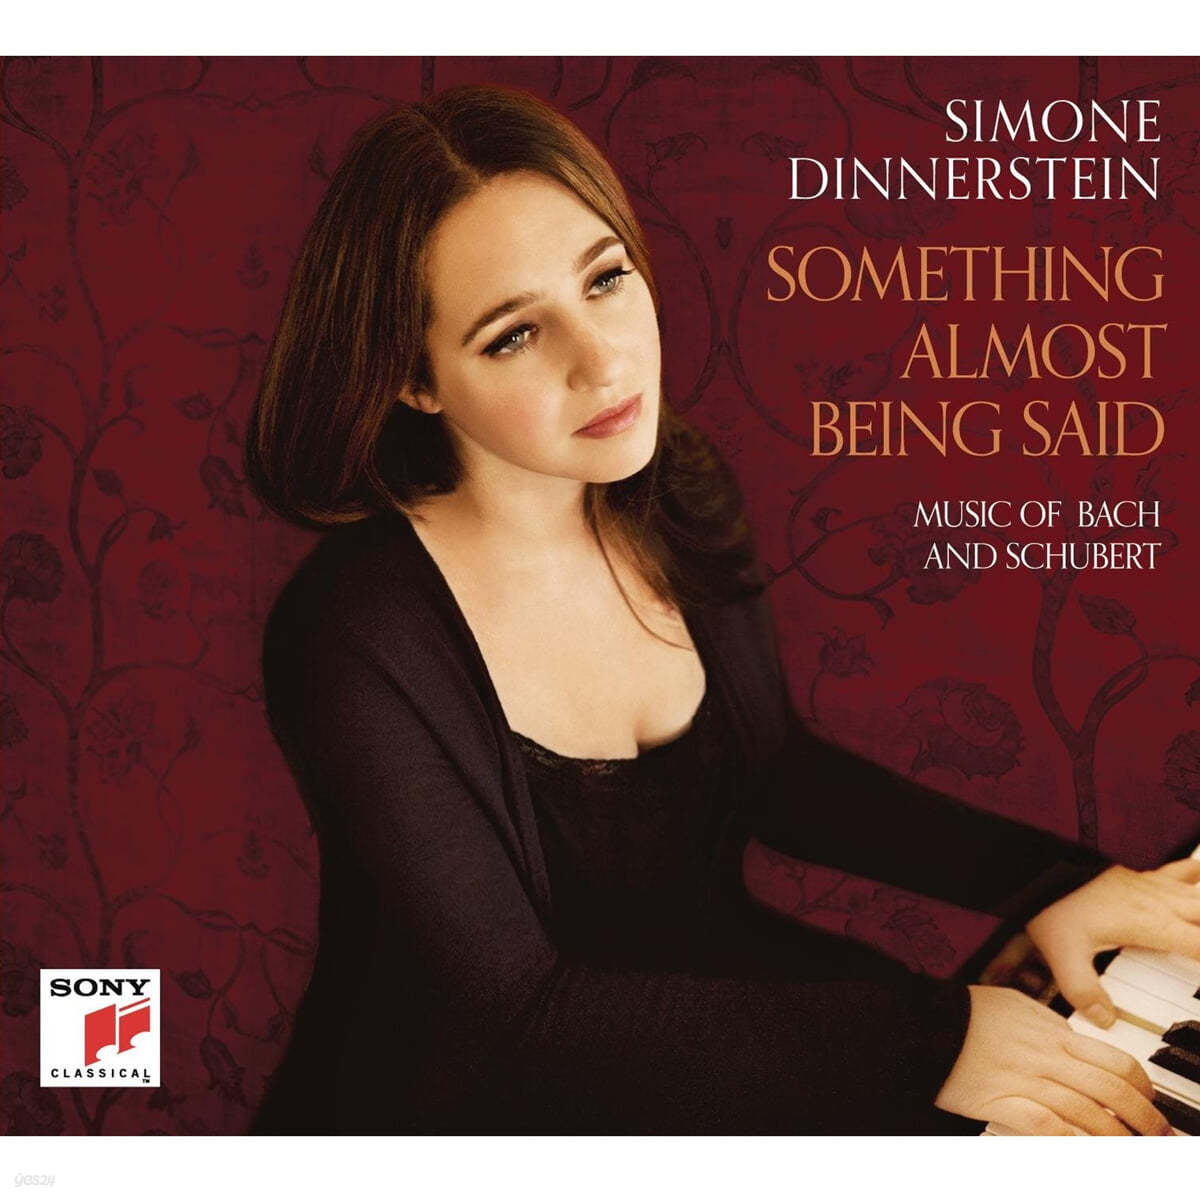 Simone Dinnerstein 시모나 디너스틴이 연주하는 슈베르트와 바흐 (Music of Bach and Schubert - Something Almost Being Said) 